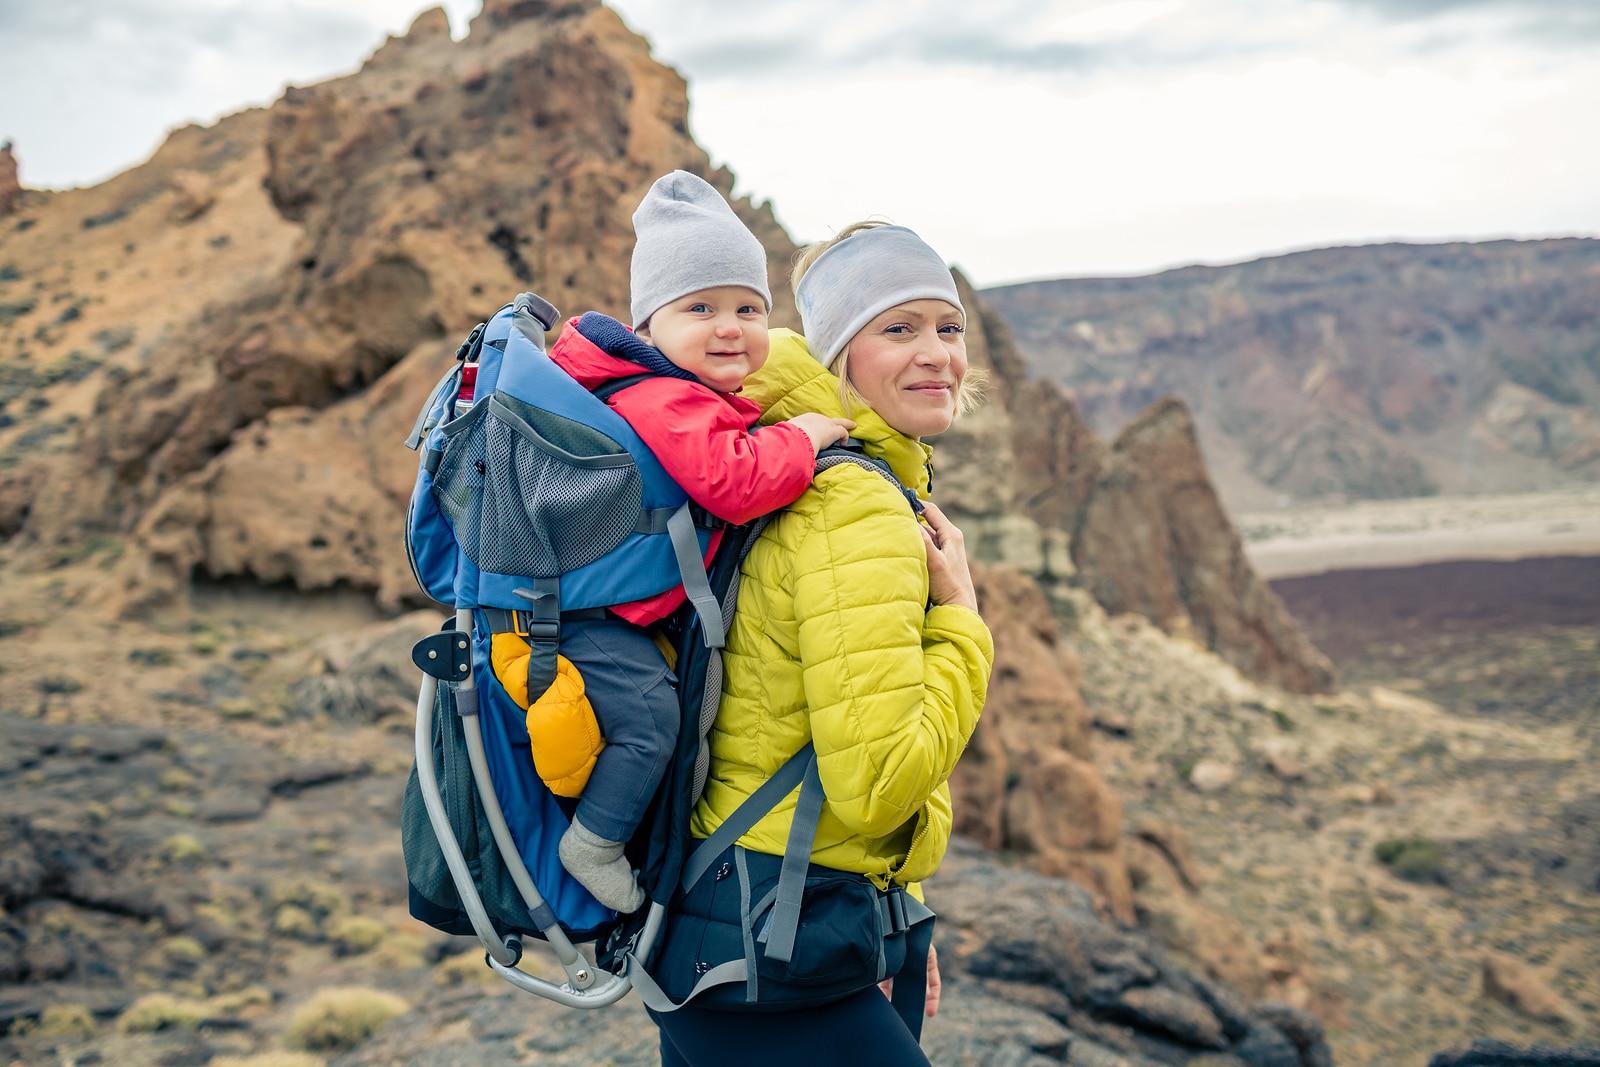 List of the Best Backpack Carriers